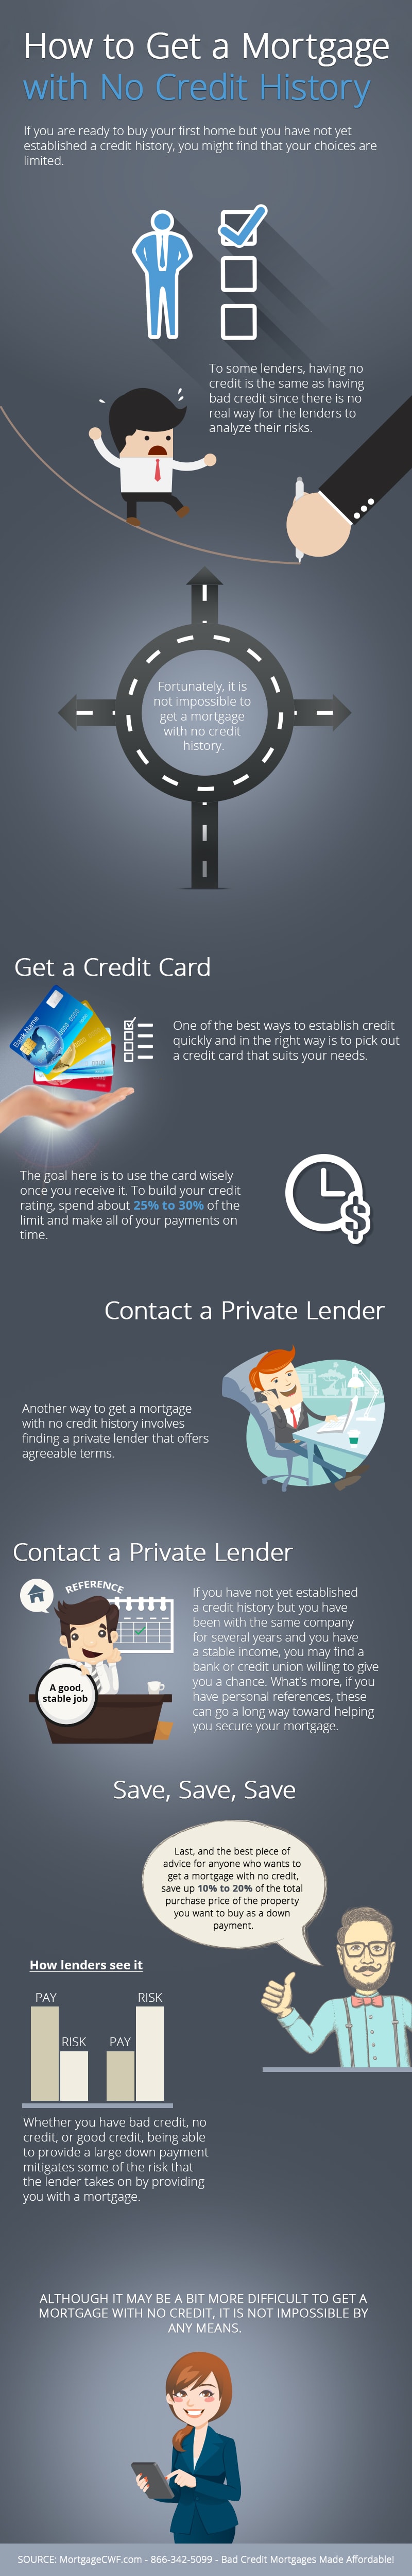 Tips on Getting a Mortgage with No Credit History - Infographic